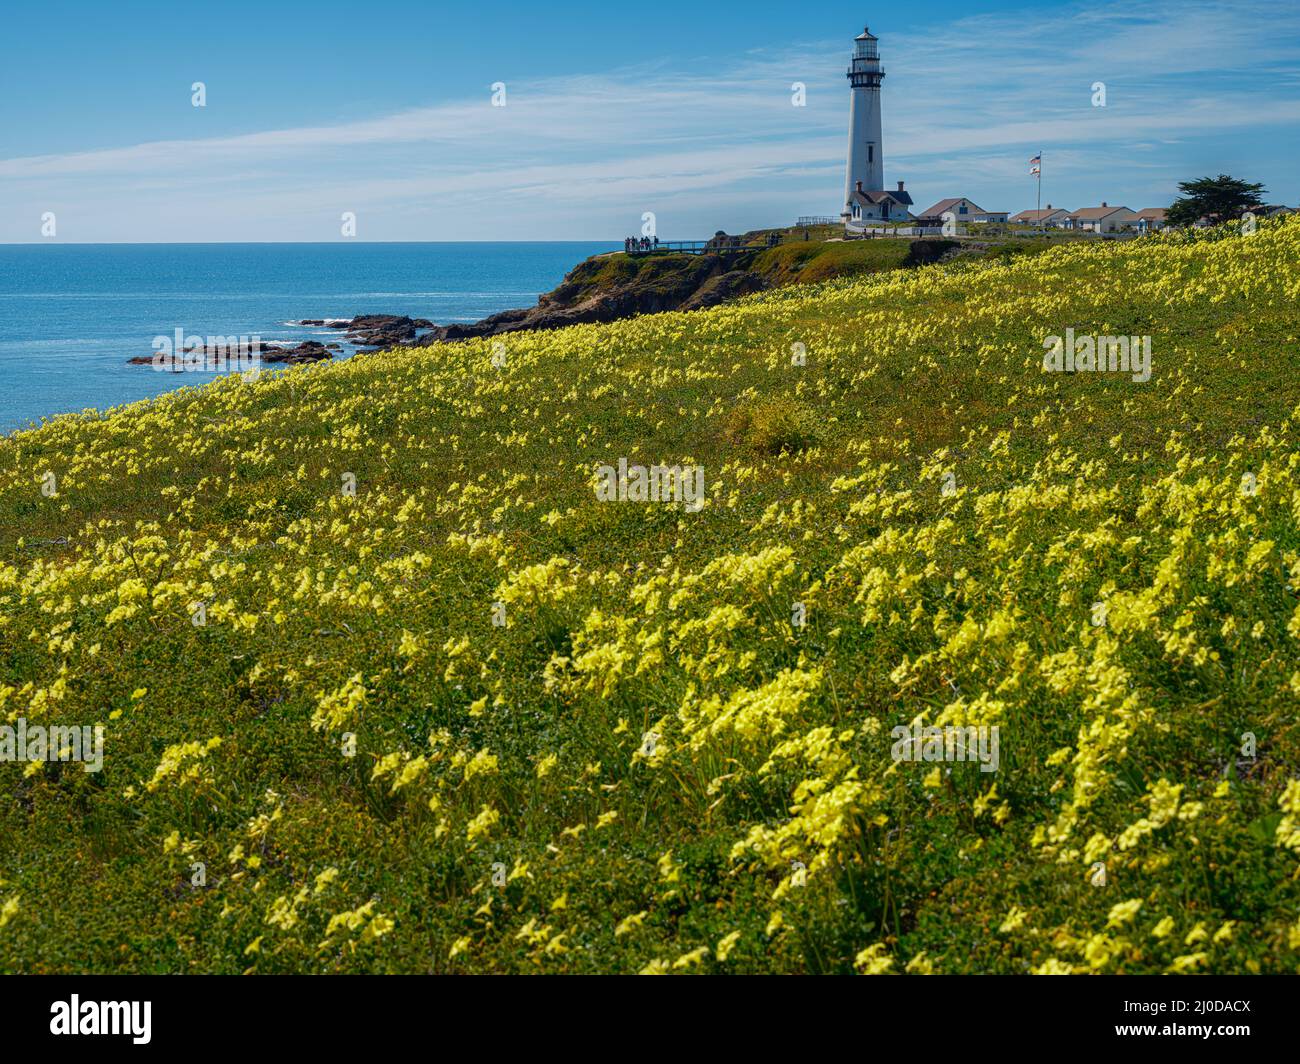 Oxalis Yellow Flowers at Pigeon Point Lighthouse, California Stock Photo